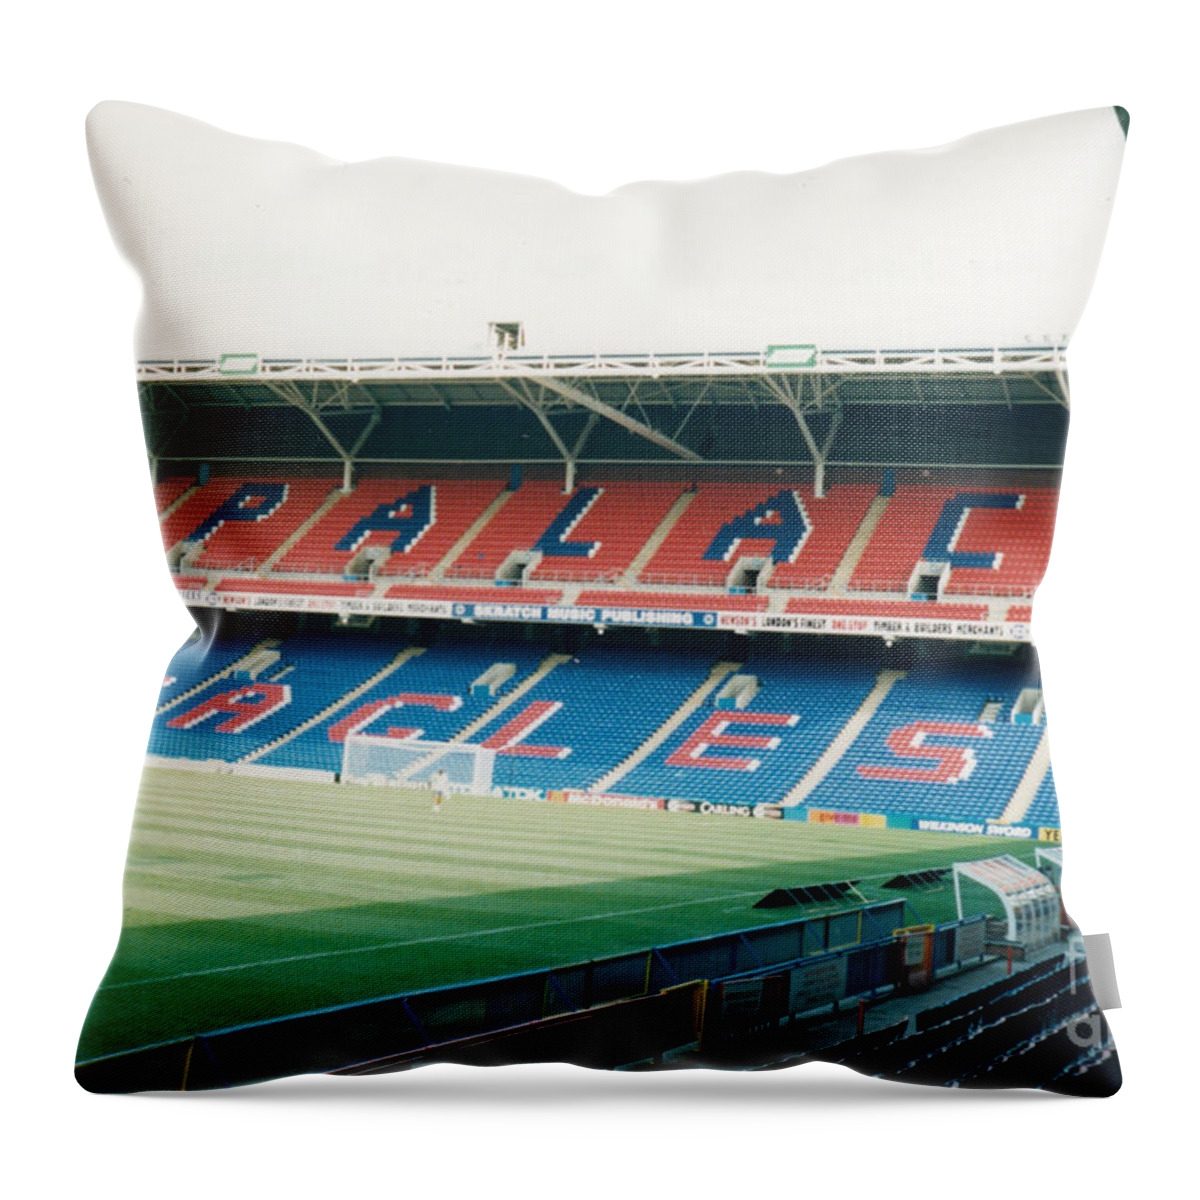 Crystal Palace Throw Pillow featuring the photograph Crystal Palace - Selhurst Park - South Stand Holmesdale Road 3 - August 1997 by Legendary Football Grounds